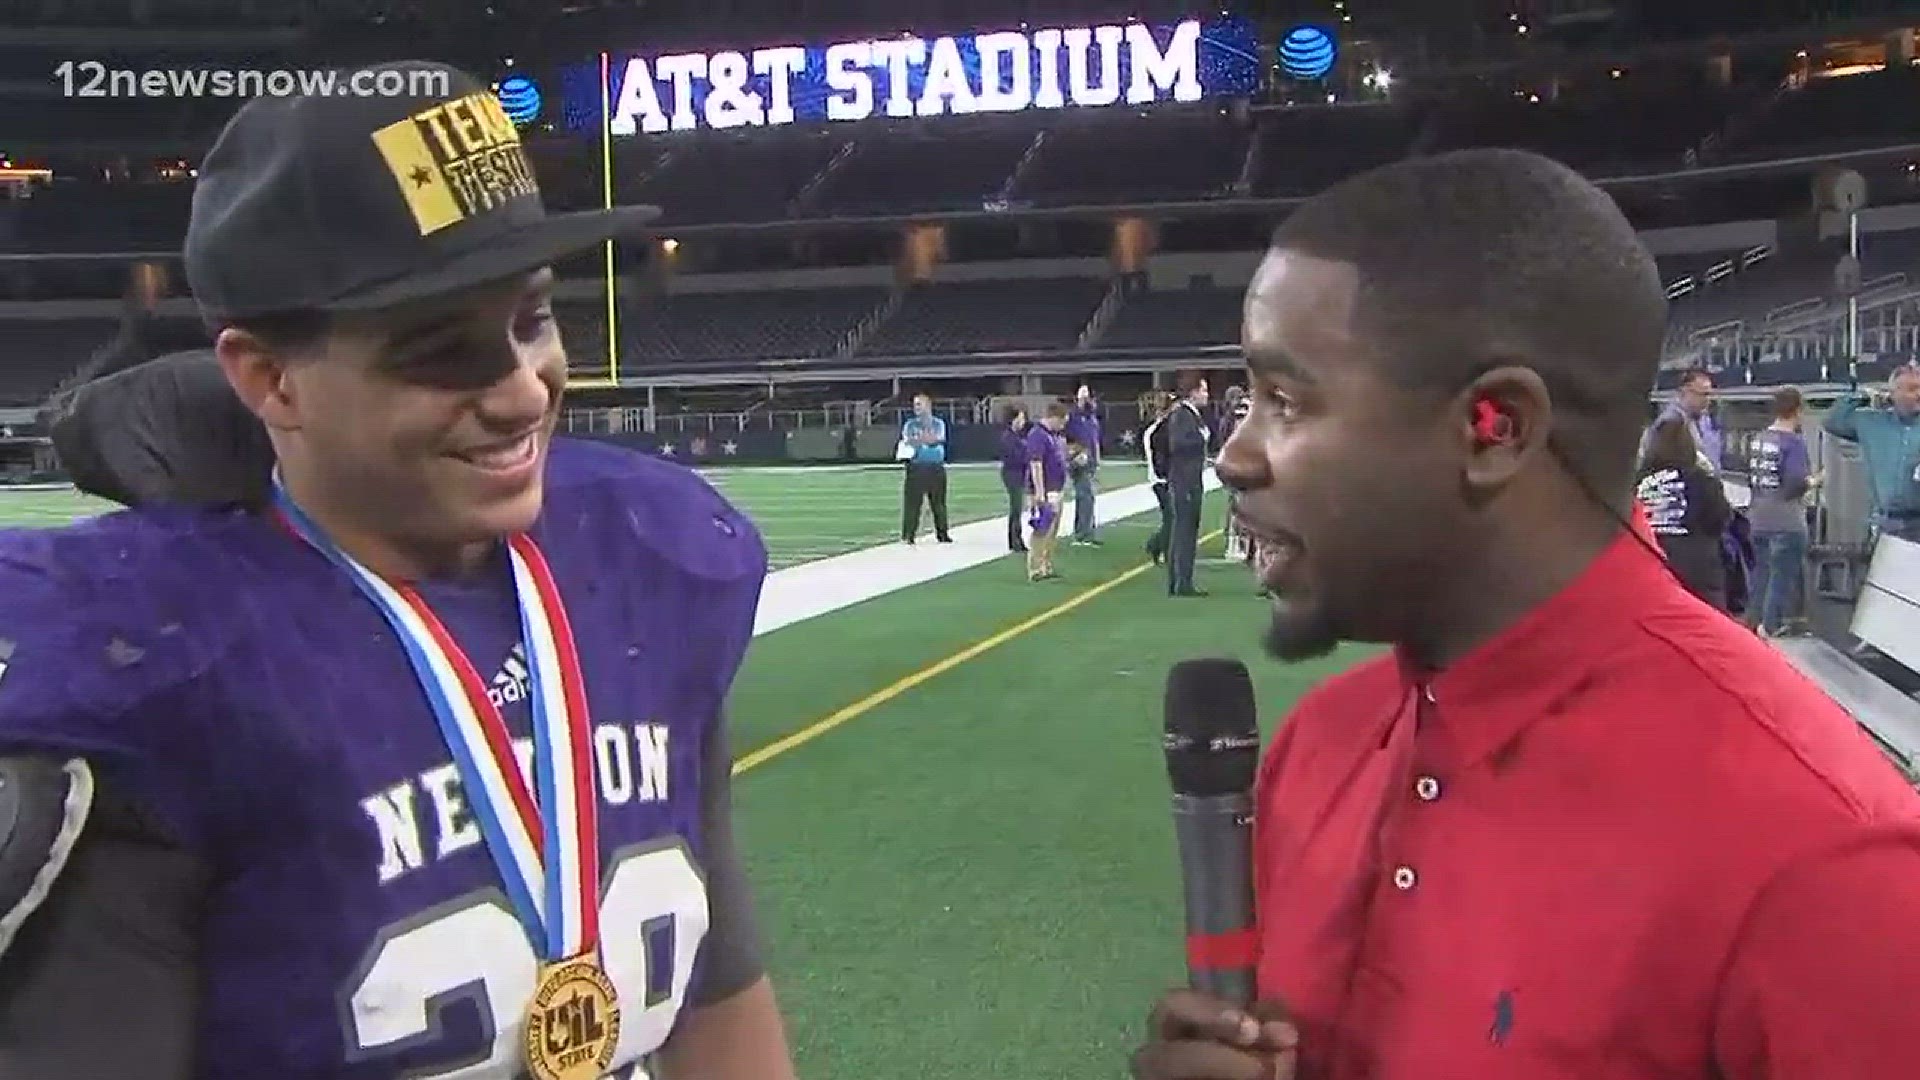 Post-game highlights from Newton High School's UIL State Championship game in Arlington